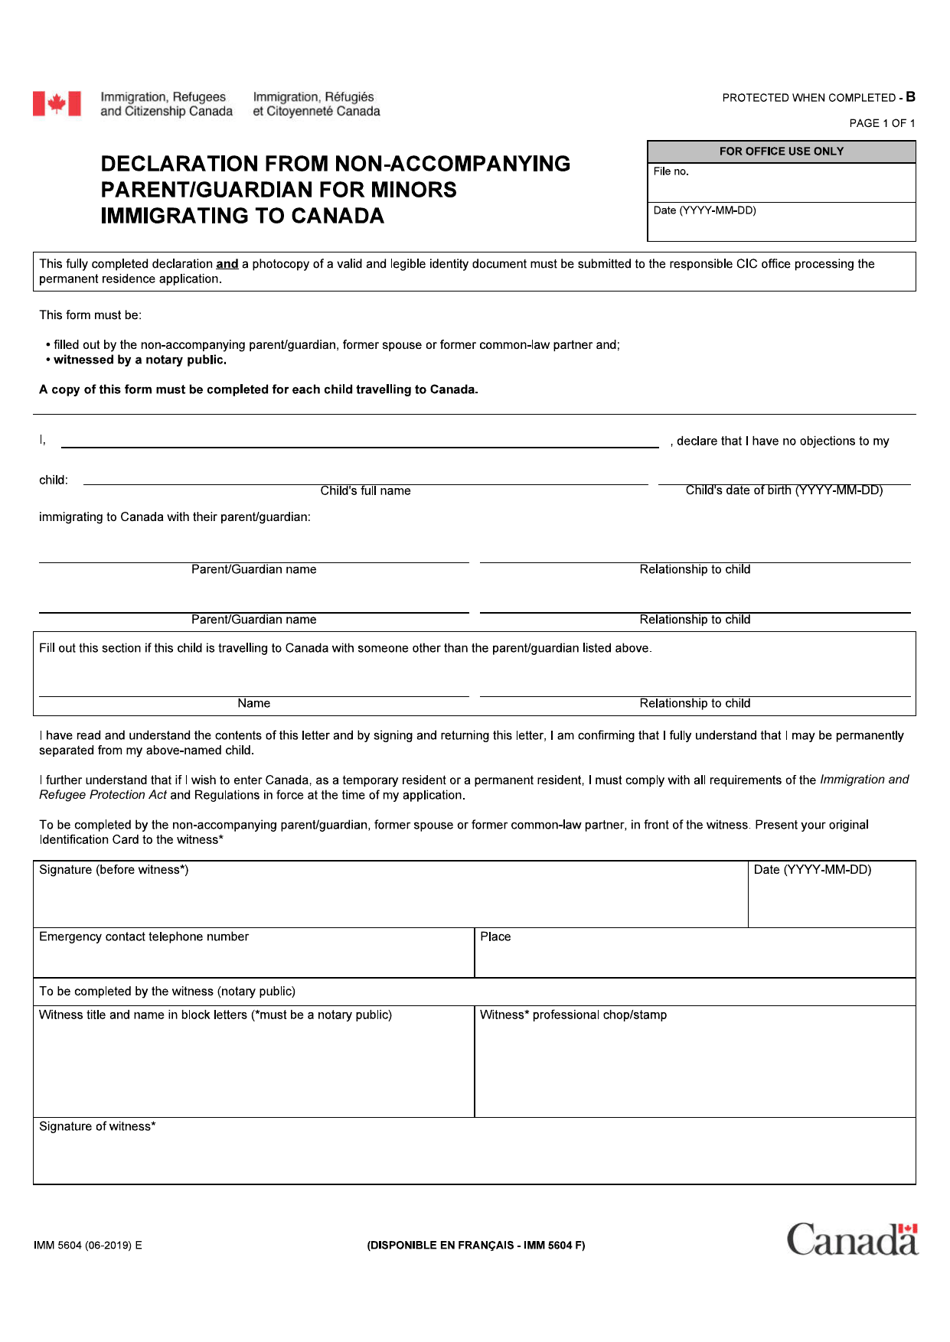 Form IMM5604 Declaration From Non-accompanying Parent / Guardian for Minors Immigrating to Canada - Canada, Page 1